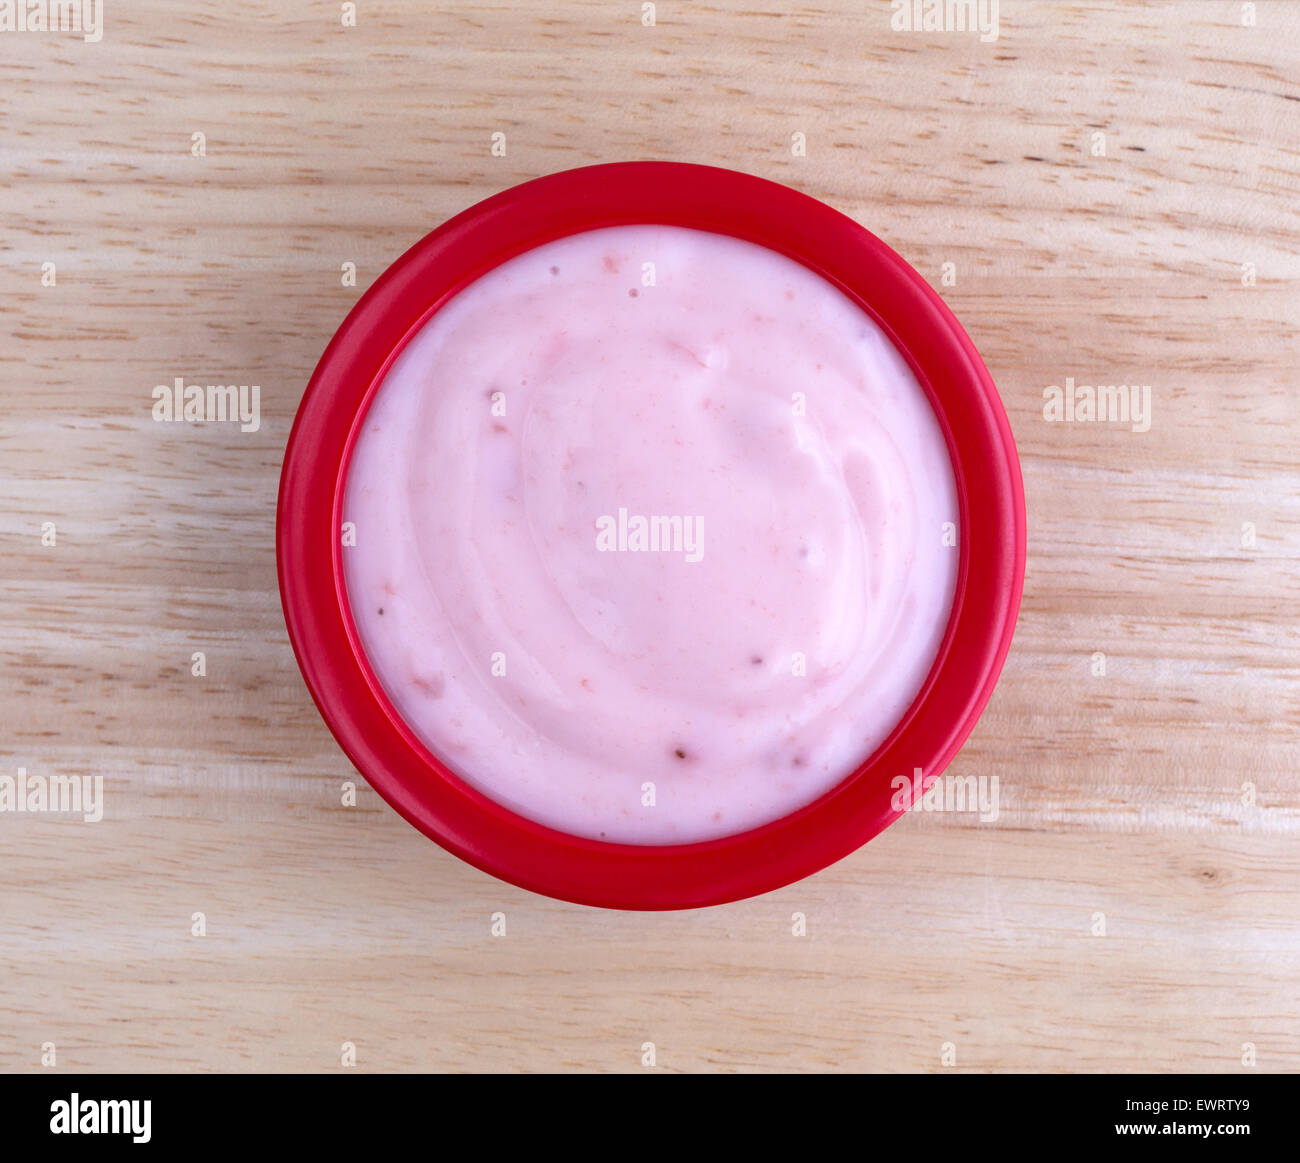 Top view of a small serving of creamy strawberry yogurt in a red bowl on top of a wood table top illuminated by window light. Stock Photo